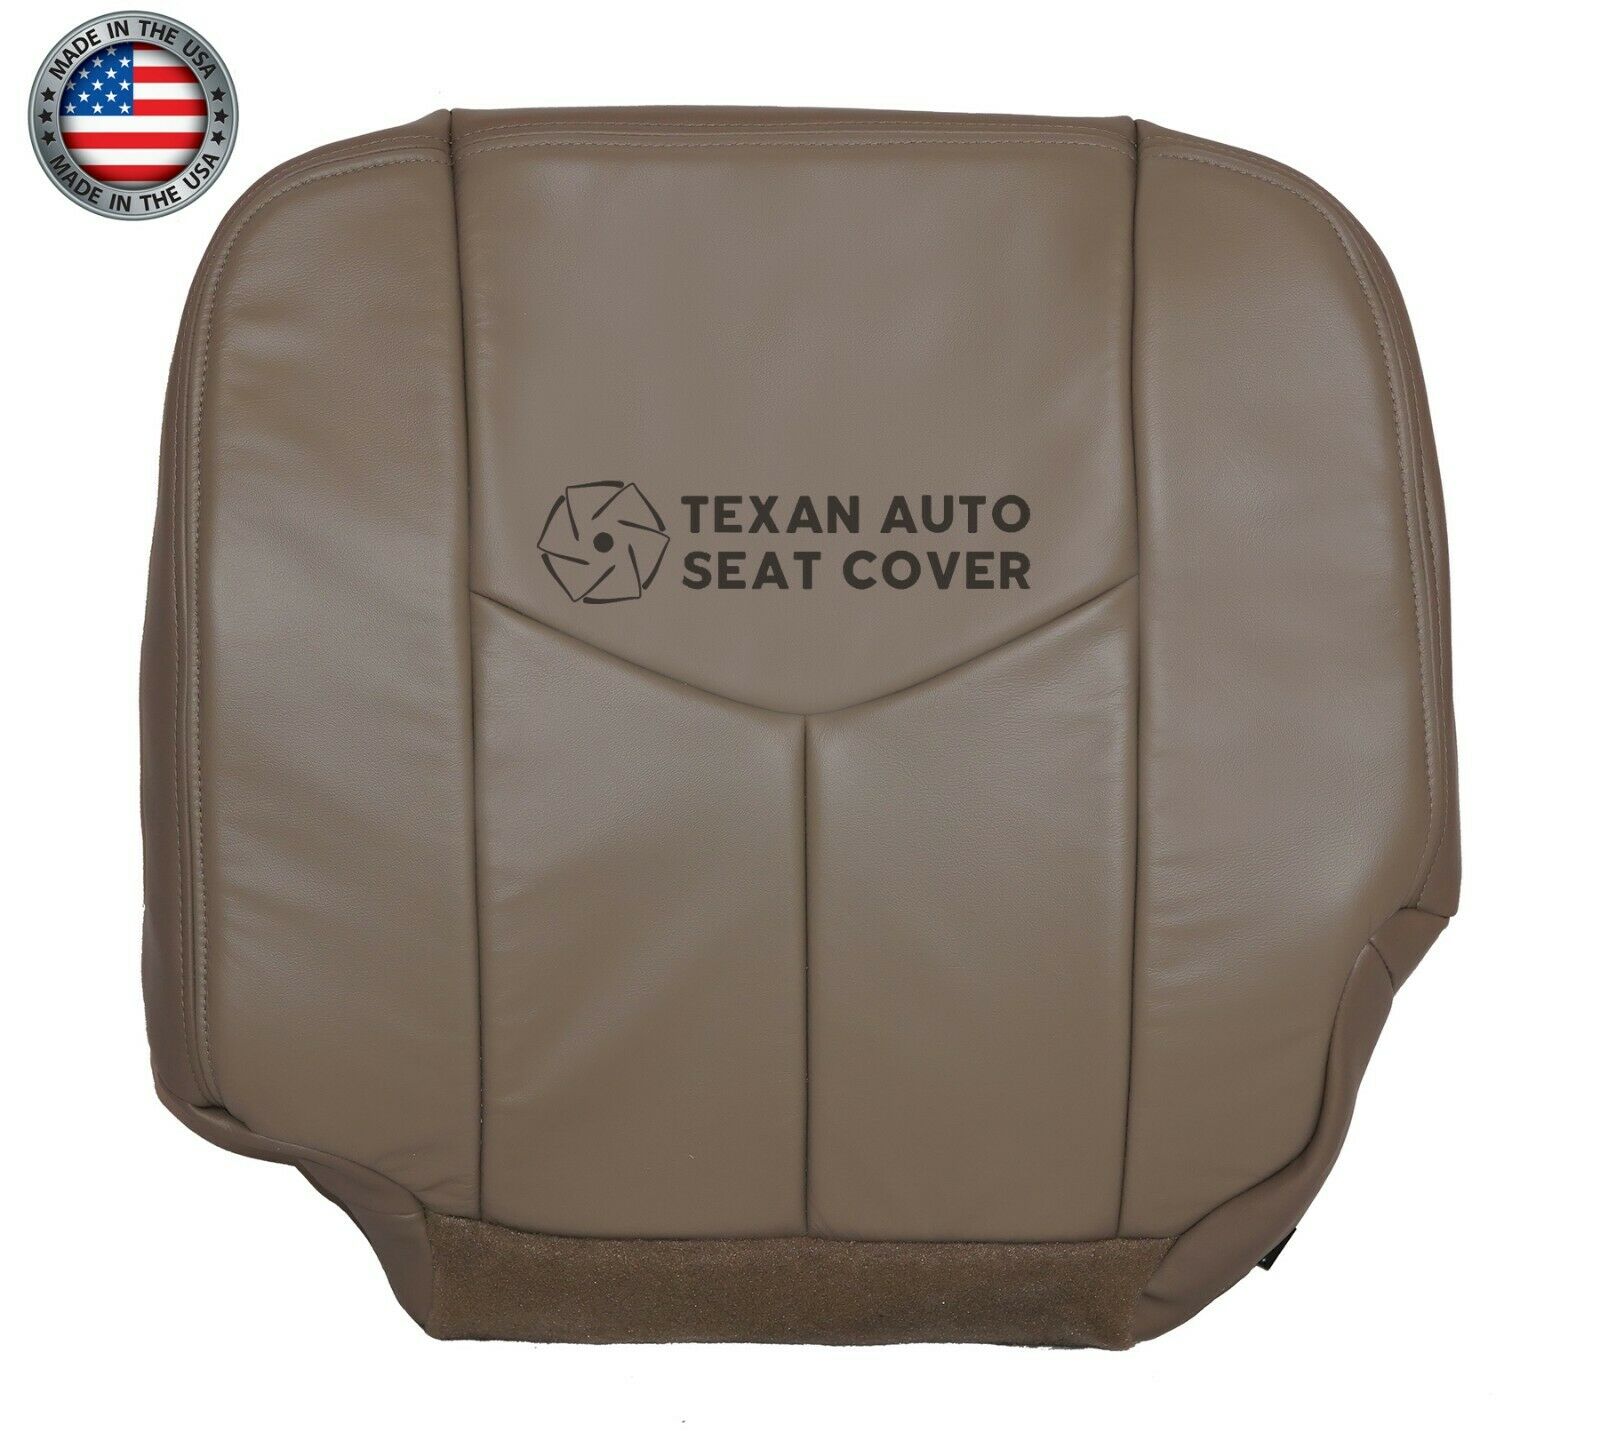 2003, 2004, 2005, 2006, 2007 GMC Sierra  SLT SLE Passenger Side Bottom Leather Replacement Seat Cover Tan